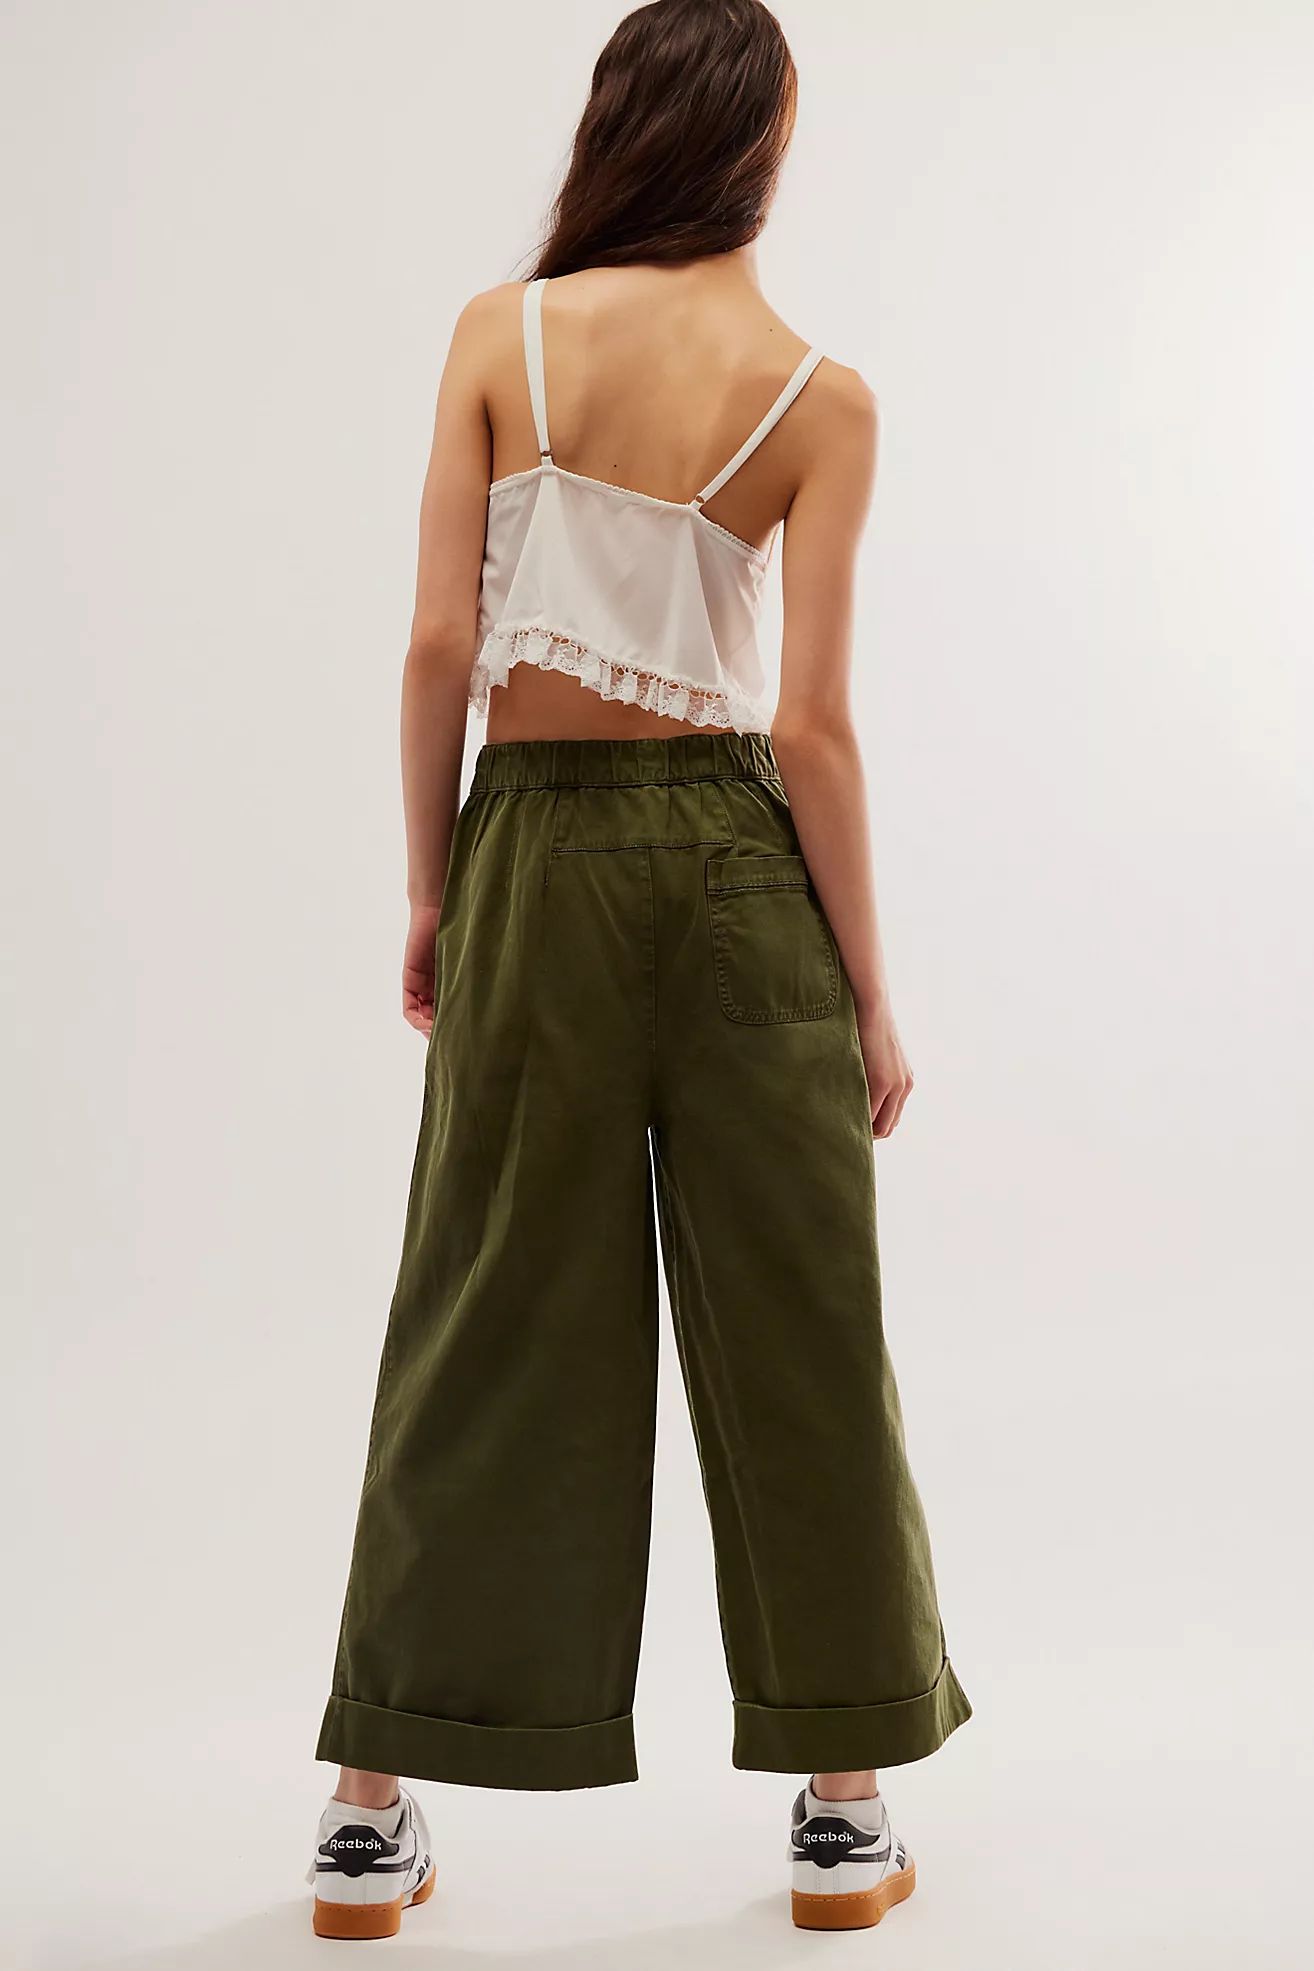 After Love Cuff Pants | Free People (Global - UK&FR Excluded)